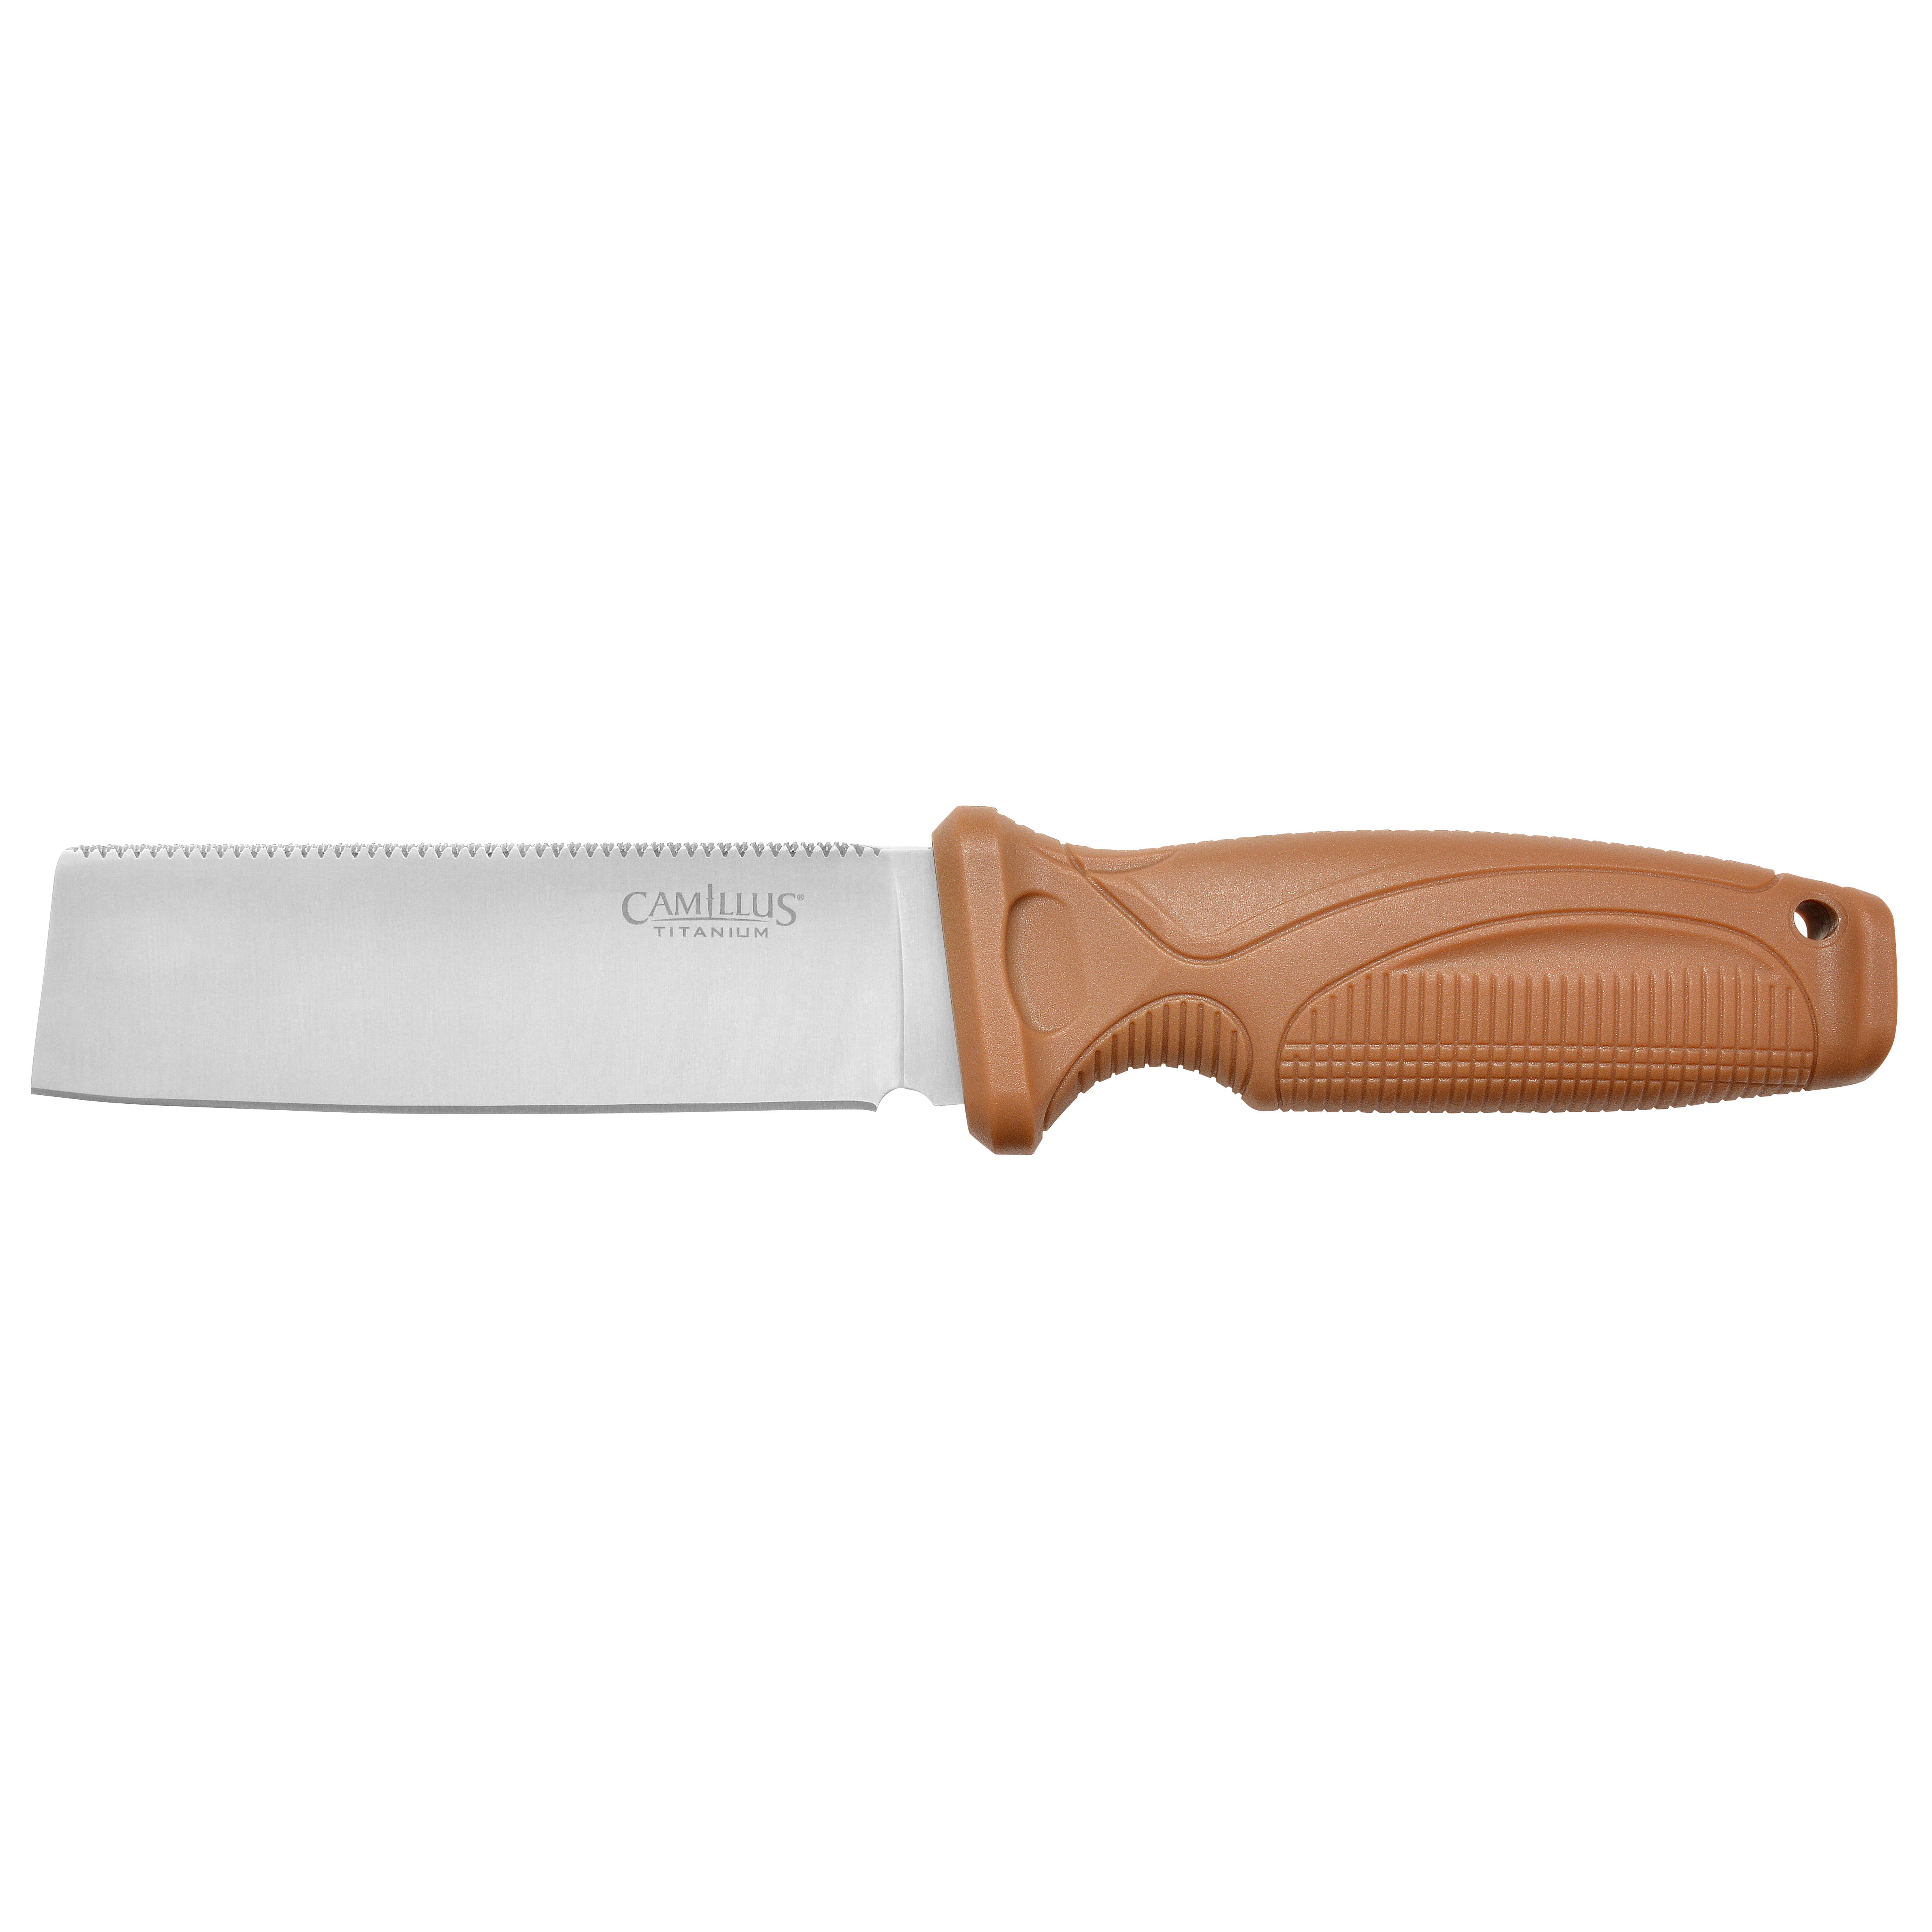 Camillus Swedge 8.75 in. Fixed Blade Knife 19624 - The Home Depot